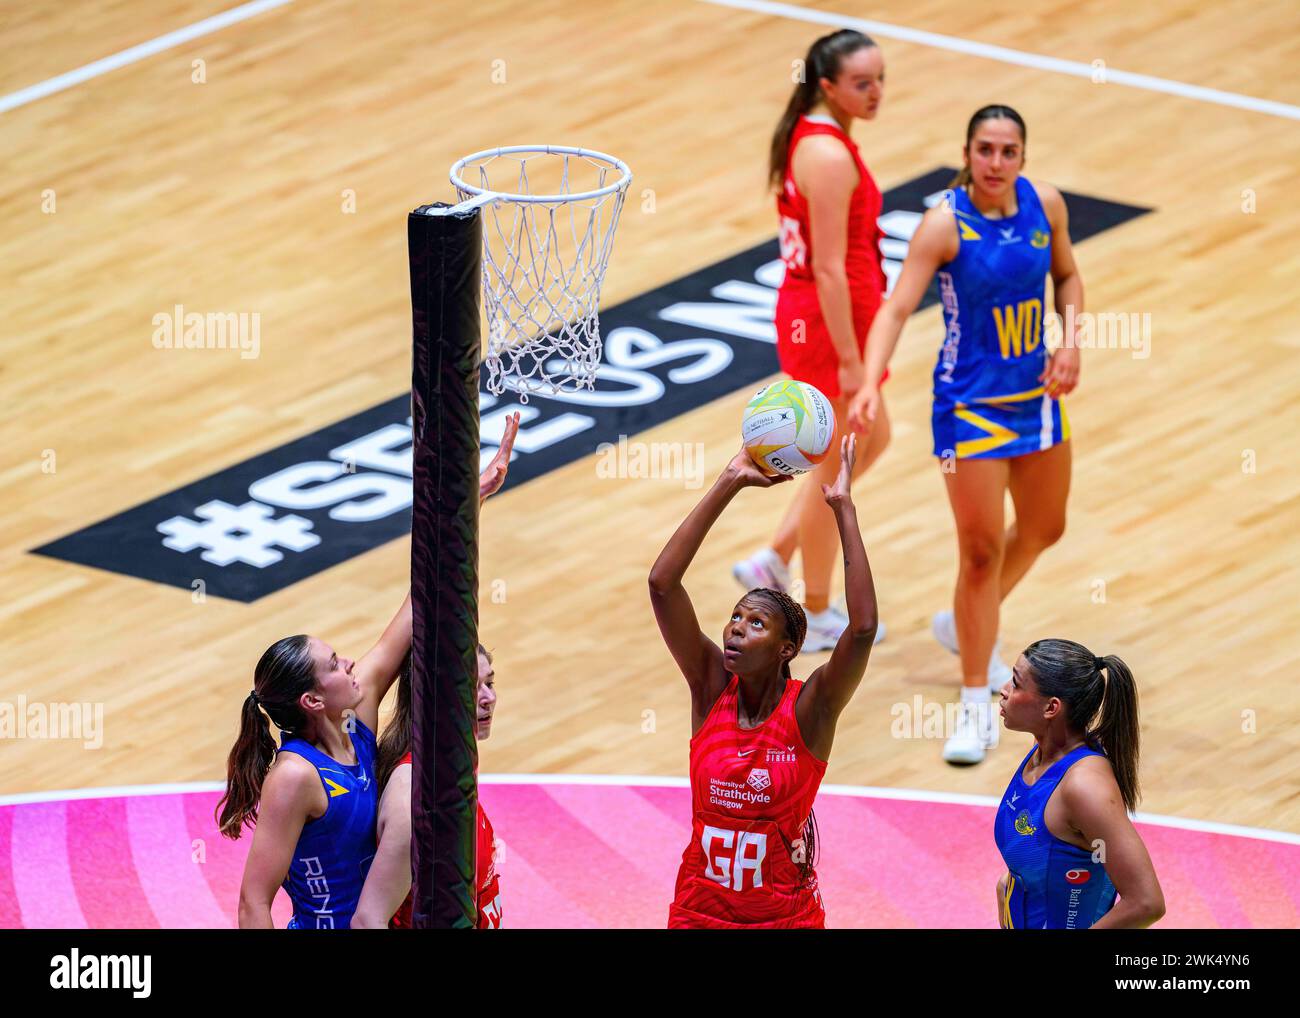 NOTTINGHAM, UNITED KINGDOM. Feb 17, 24. Sammy Ngubane (centre) in action during todays match of Strathclyde Sirens v Team Bath during Netball Super League Season Opener 2024 at Motorpoint Arena on Saturday, February 17, 2024, NOTTINGHAM, ENGLAND. Credit: Taka G Wu/Alamy Live News Stock Photo